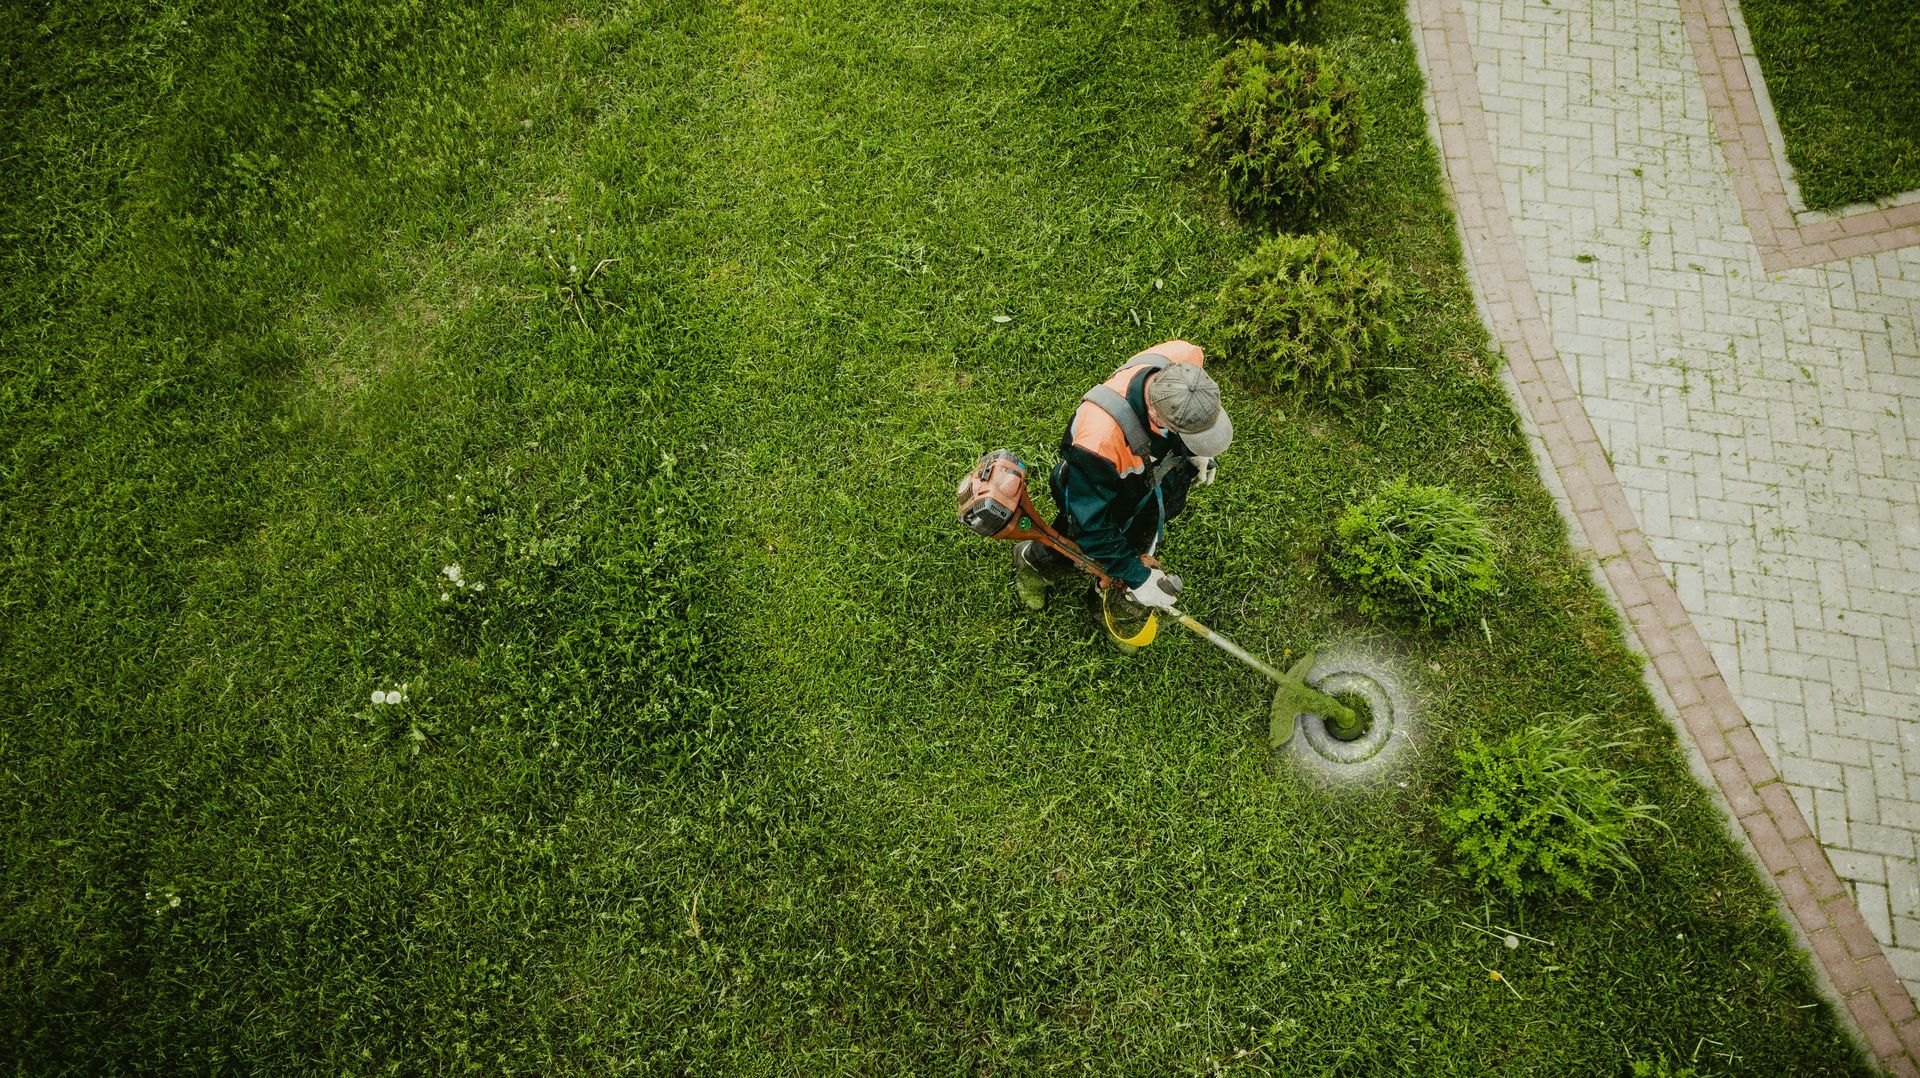 Lawn Care Tips From The Pros